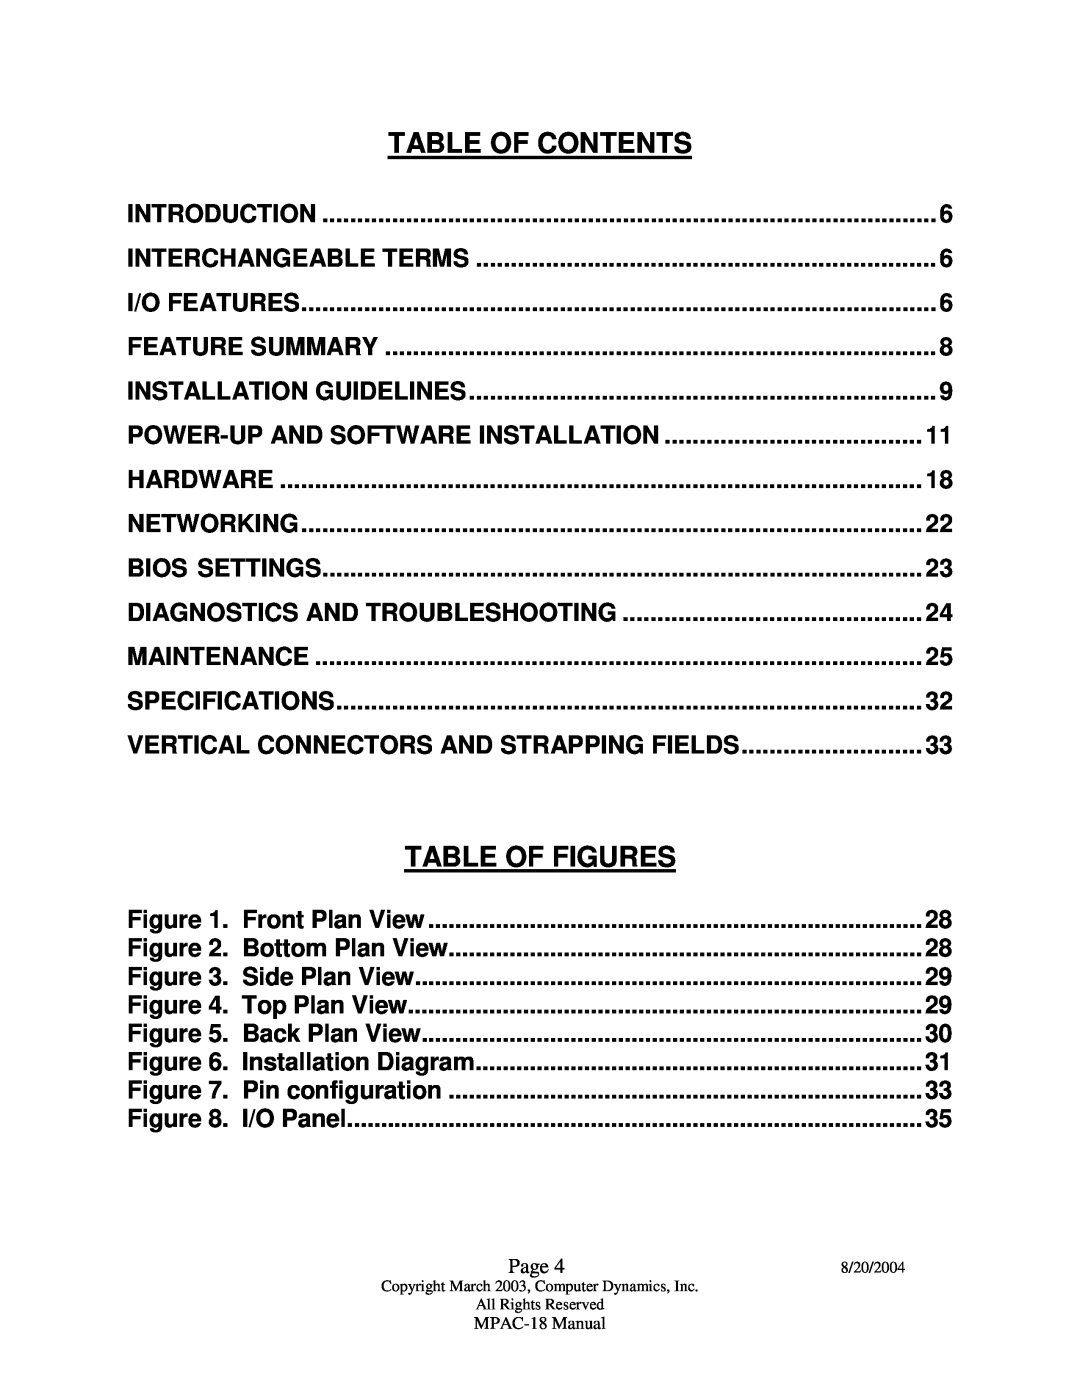 Compaq MPAC-18 Table Of Contents, Table Of Figures, Introduction, Interchangeable Terms, I/O Features, Feature Summary 